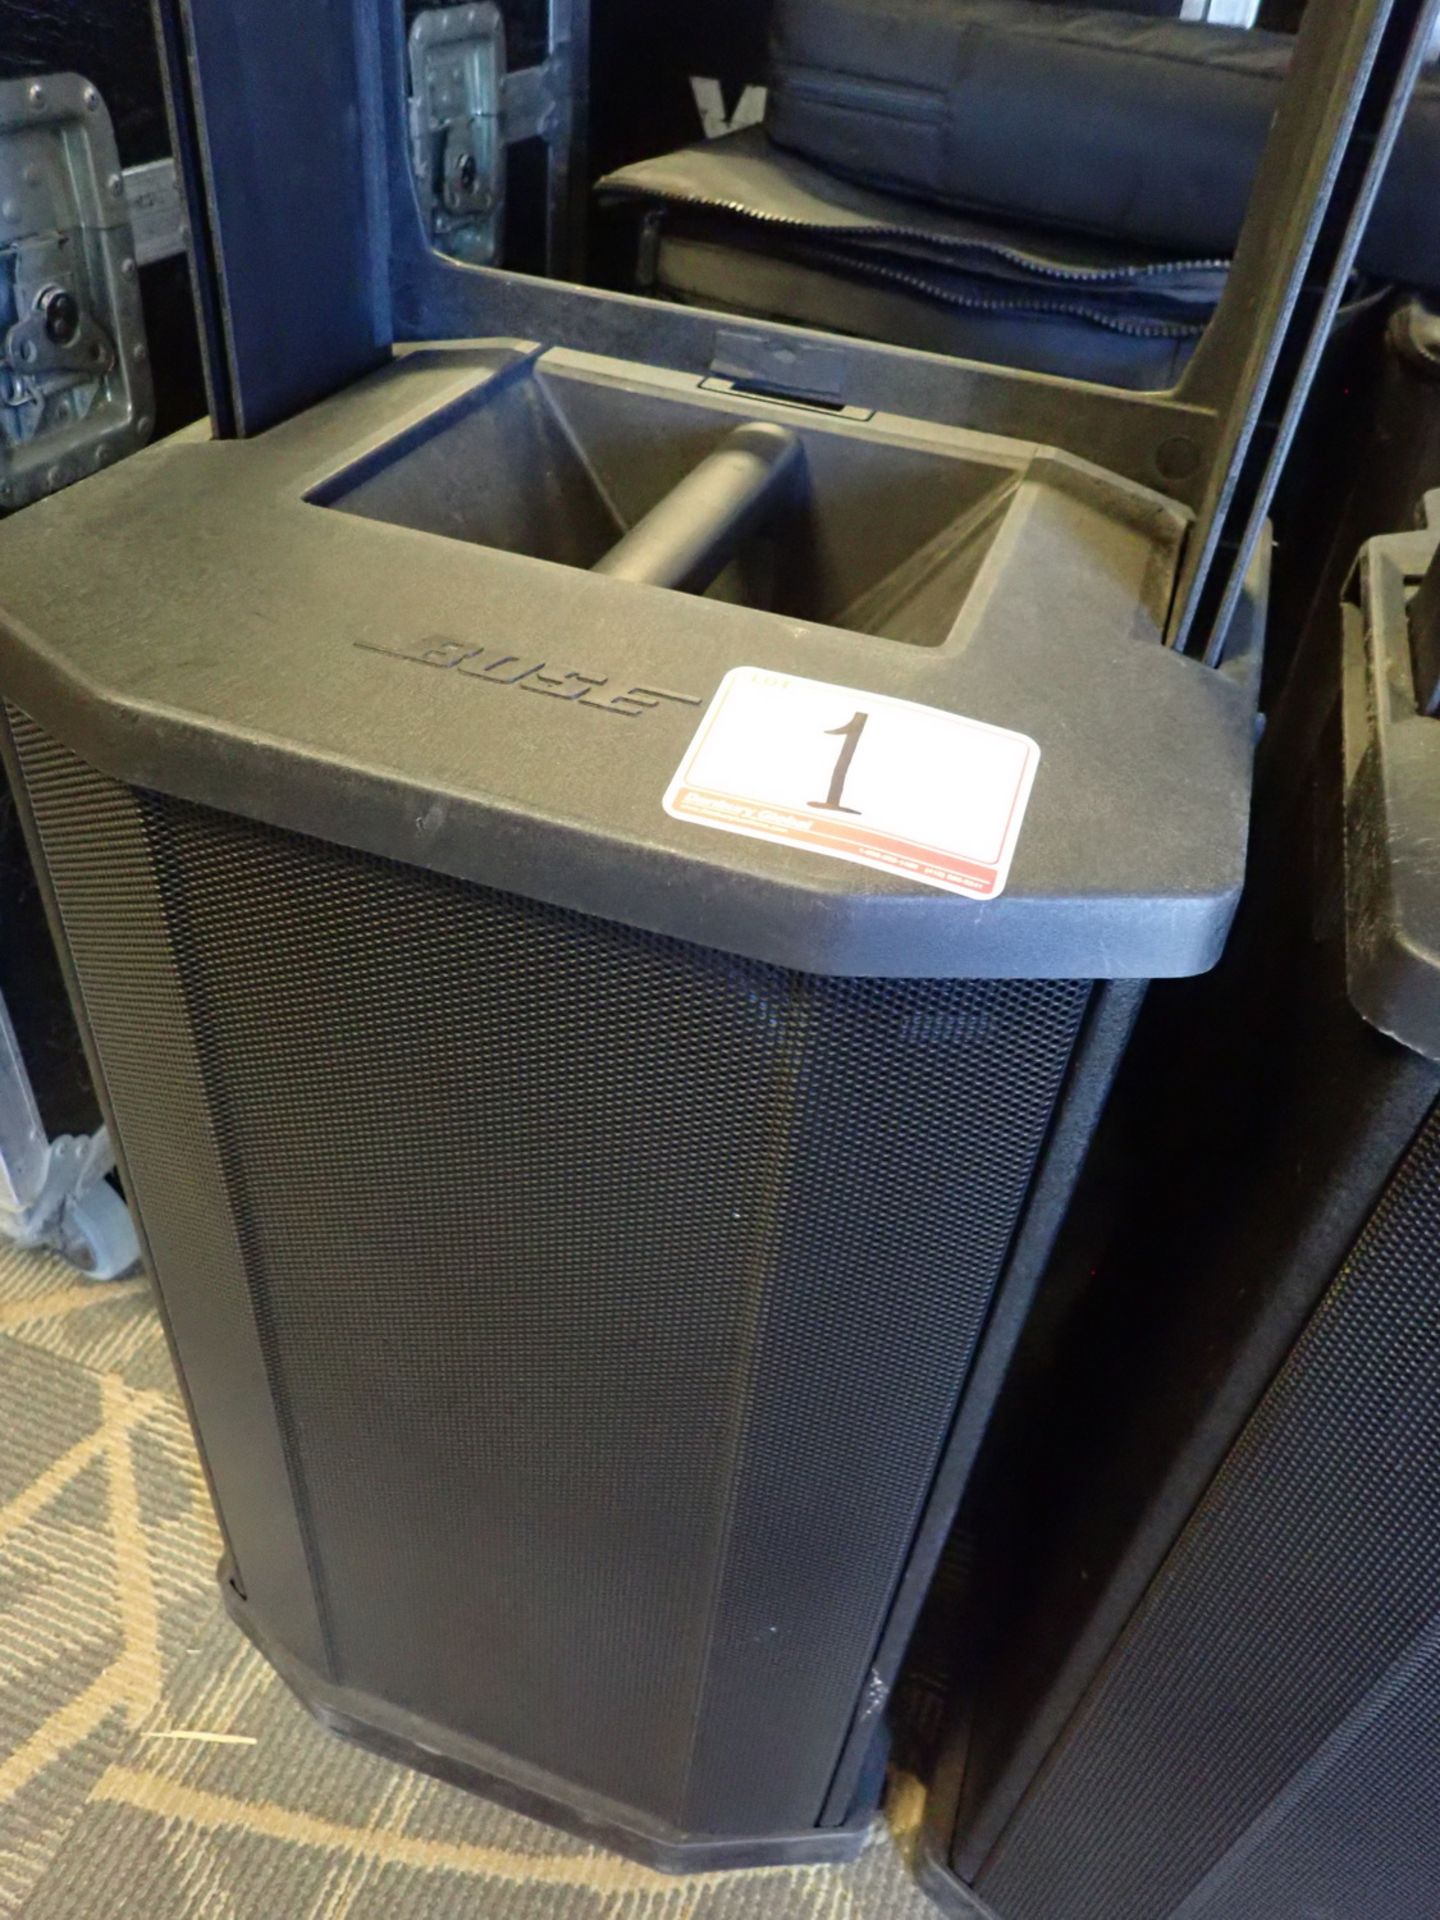 LOT - BOSE F1 812 FLEXIBLE ARRAY C/W F1 SUBWOOFER, STAND, & TRAVEL SOFT CASE - Image 3 of 4